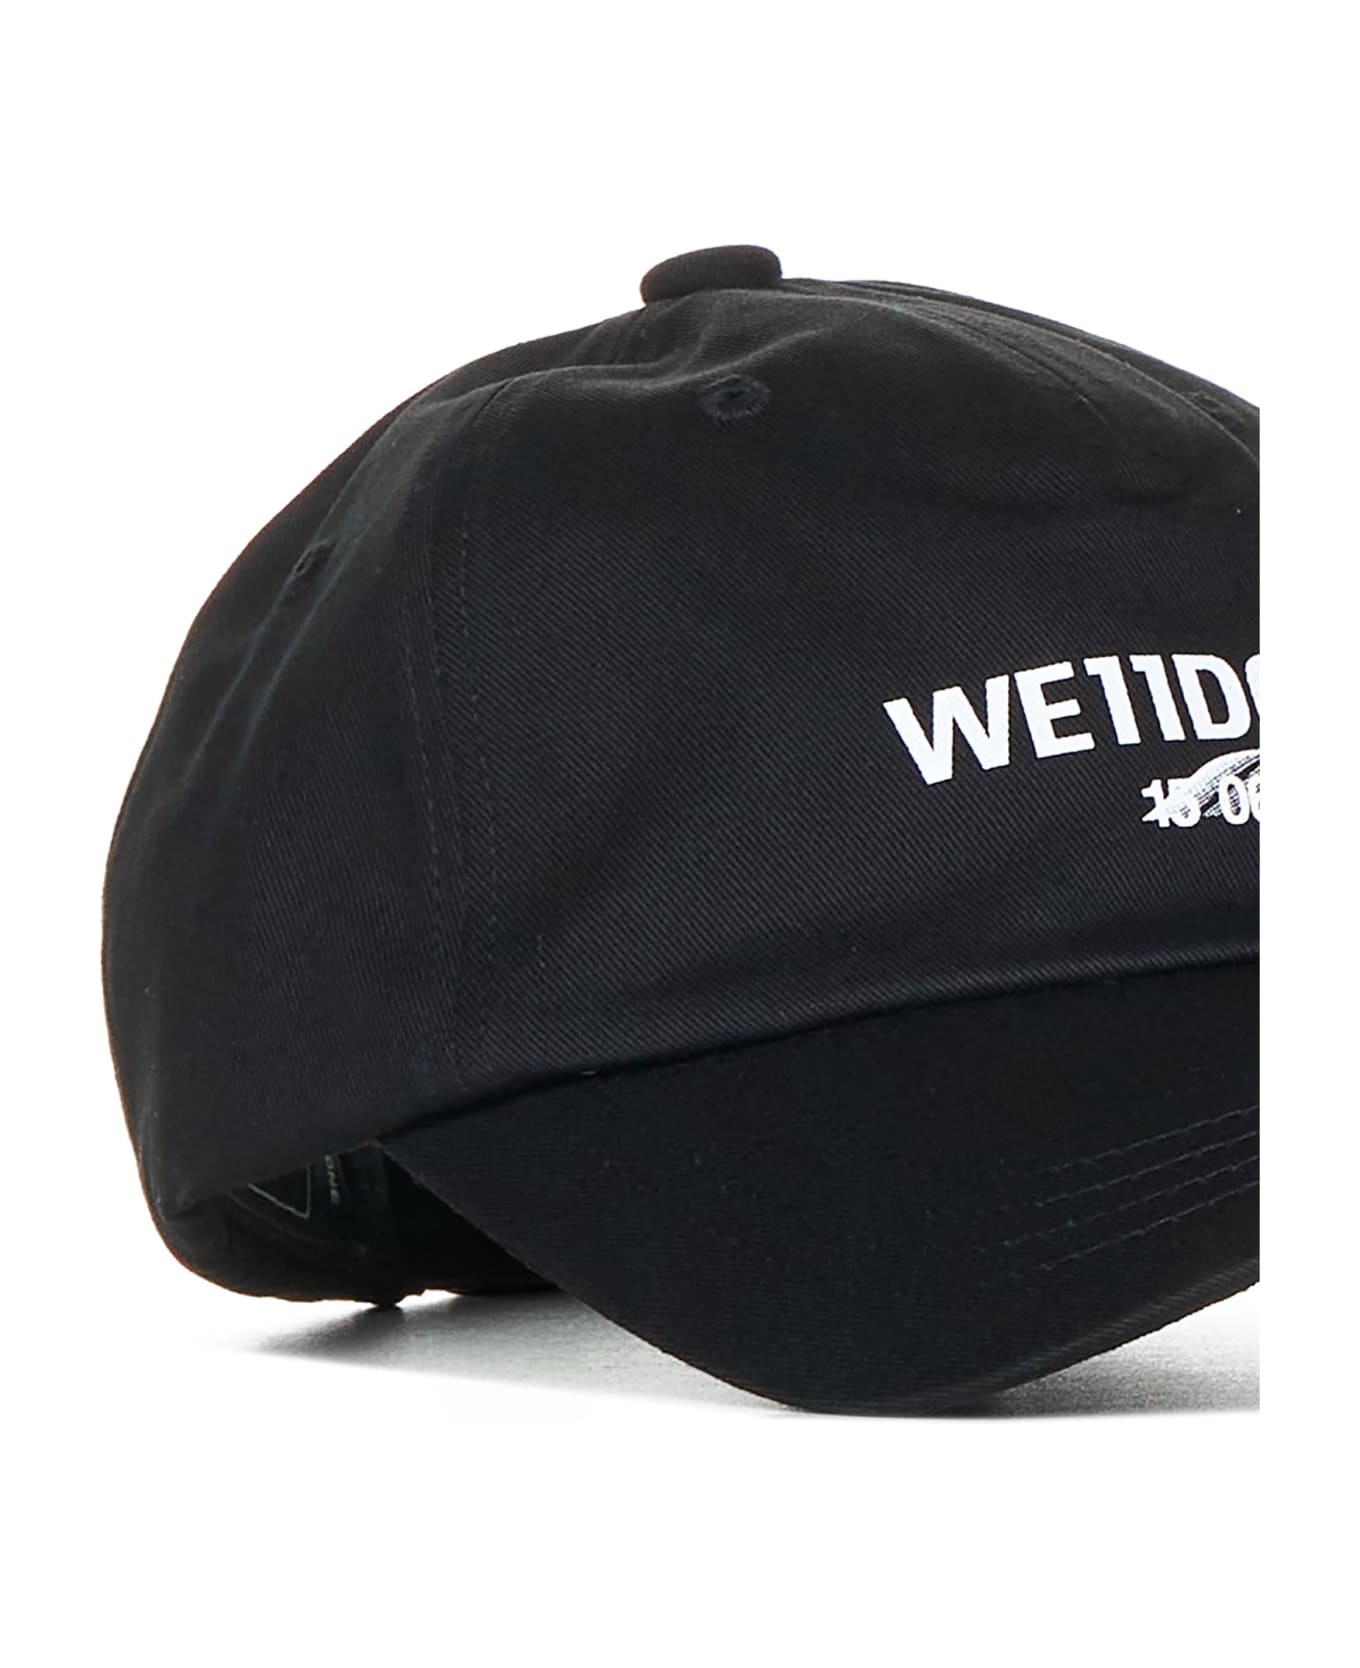 WE11 DONE Hat Rudolph - Black